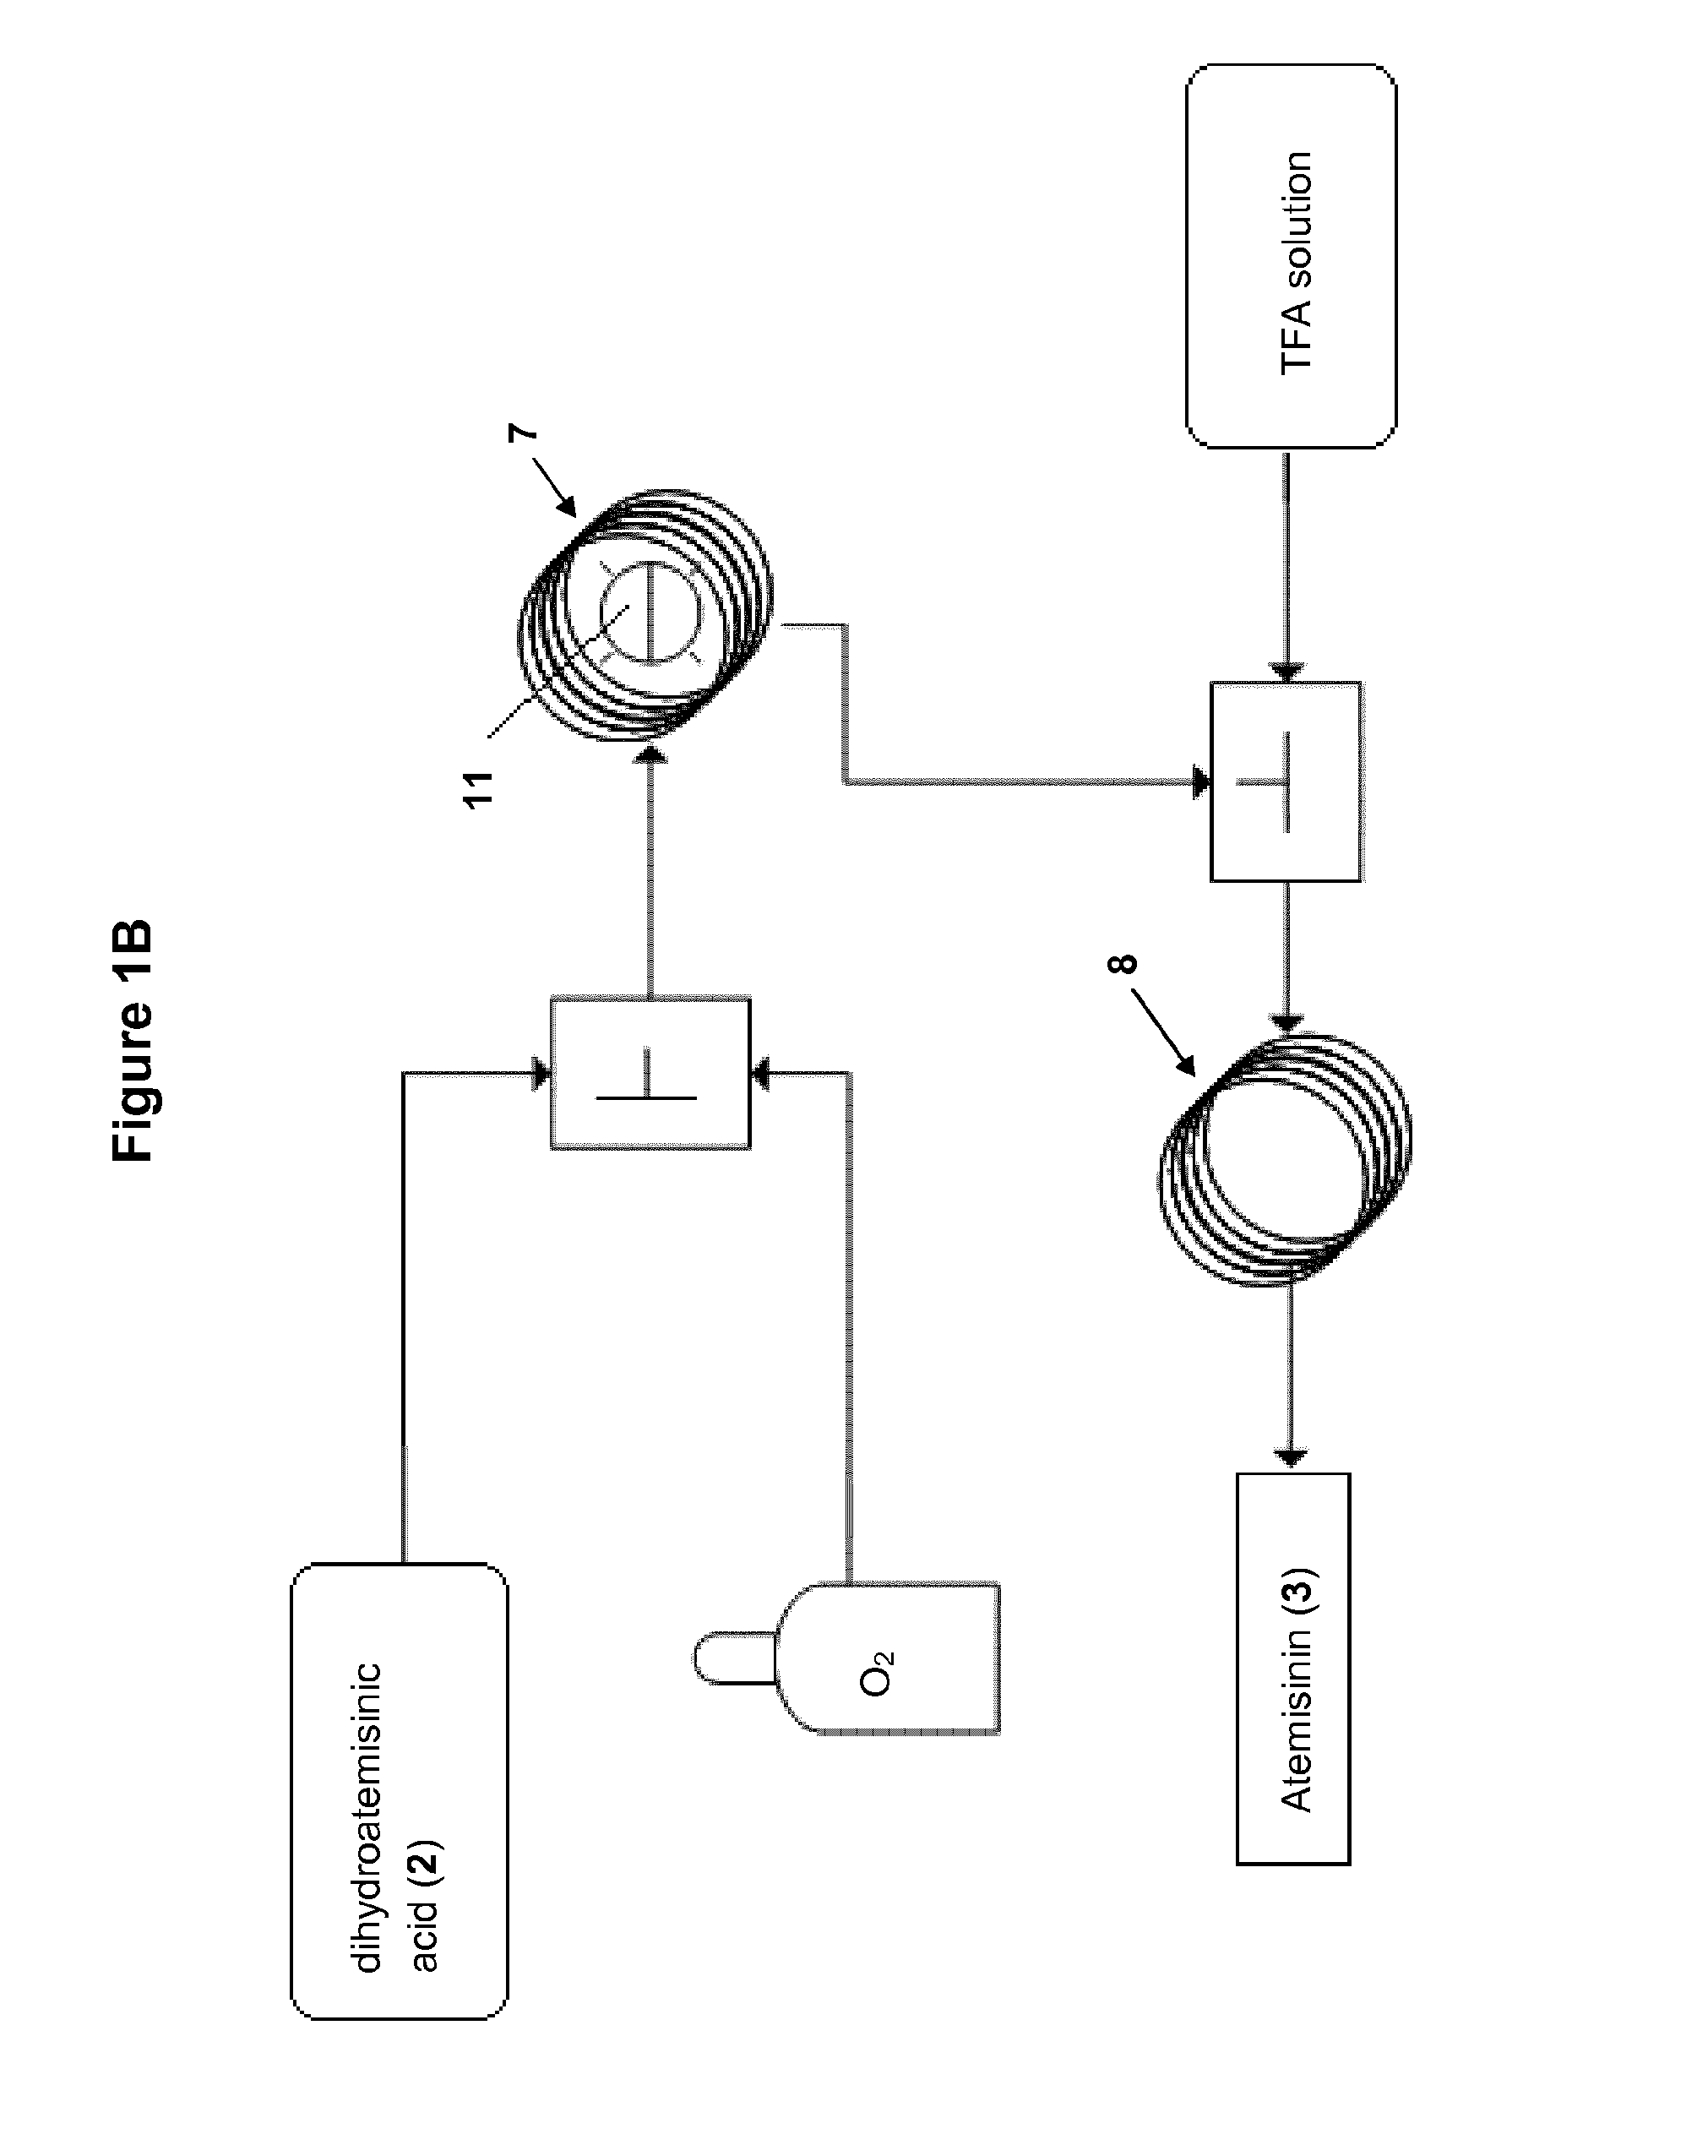 Method and apparatus for the synthesis of dihydroartemisinin and artemisinin derivatives